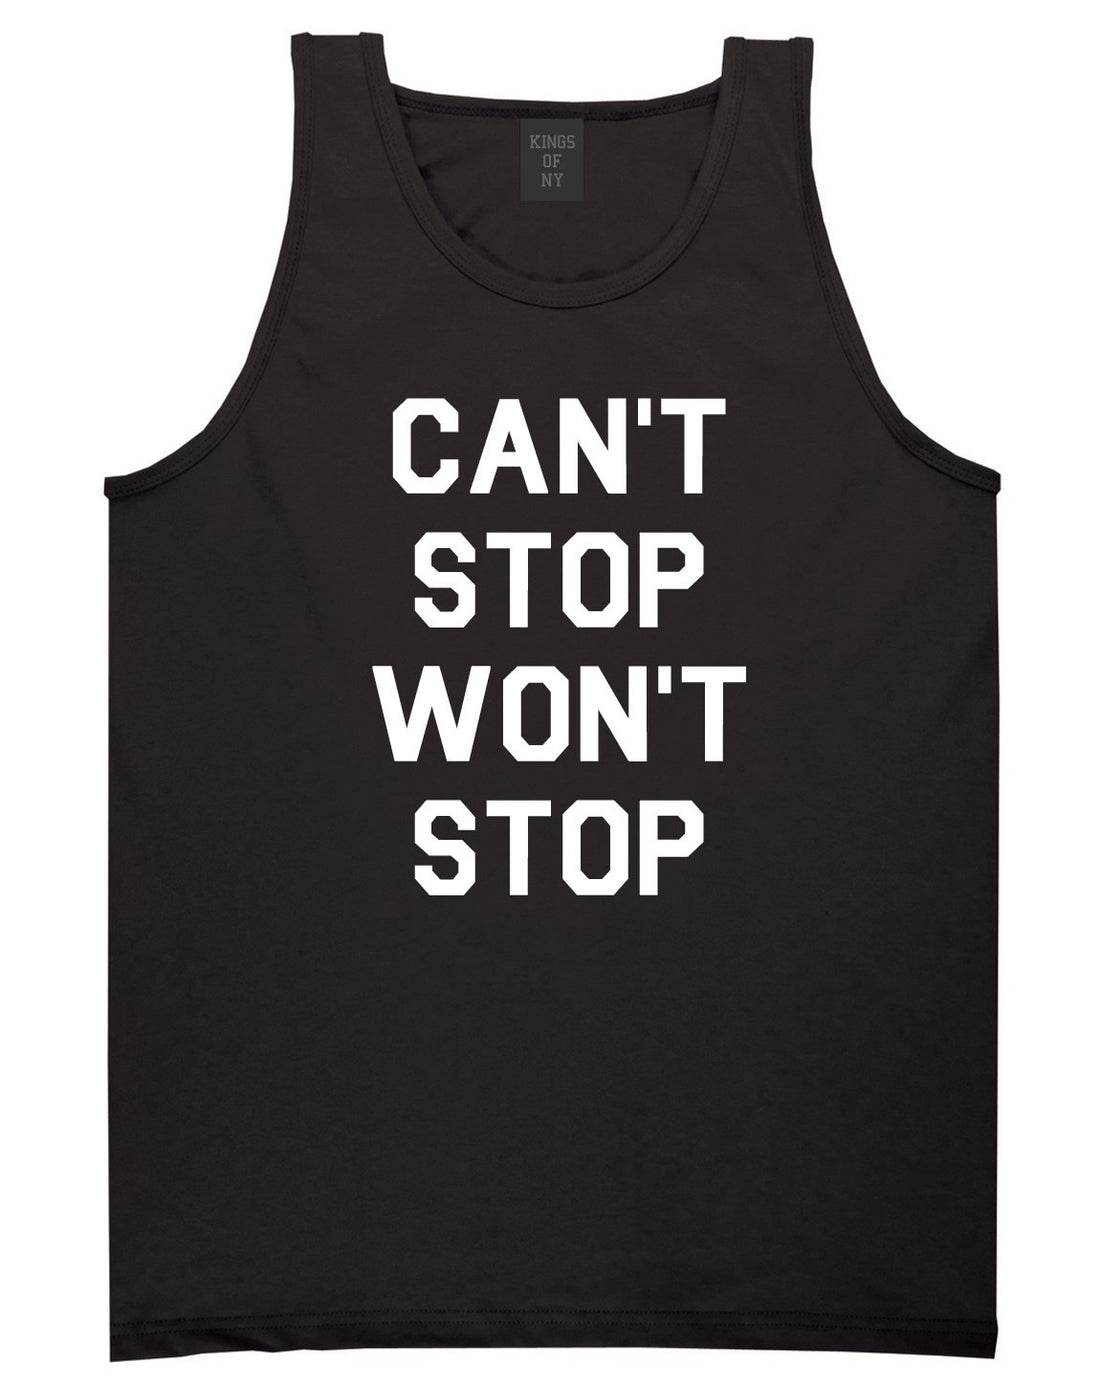  Kings Of NY Cant Stop Wont Stop Tank Top in Black